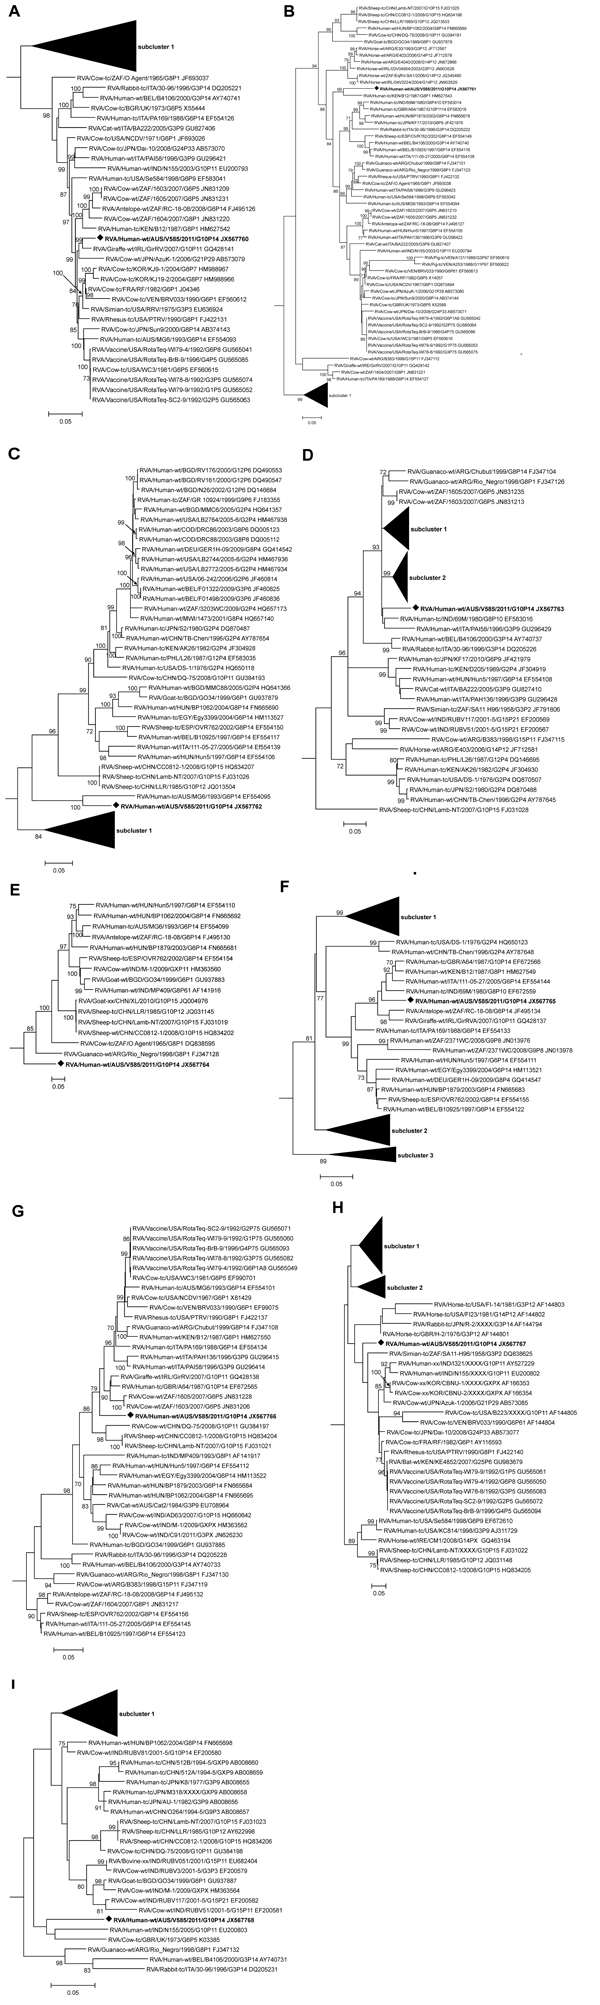 Phylogenetic trees constructed from the nucleotide sequences of genes of rotavirus strain V585 and other group A rotavirus strains representing the R2, C2, M2, I2, A11, N2, T6, E2, and H3 genotypes. A) Viral protein (VP) 1, B) VP2, C) VP3, D) VP6, E) nonstructural protein (NSP) 1, F) NSP2, G) NSP3, H) NSP4, and I) NSP5. The reference strains for each genogroup were included in the phylogenetic analysis, but only the relevant genotype to V585 is shown in the final tree. The position of strain V58